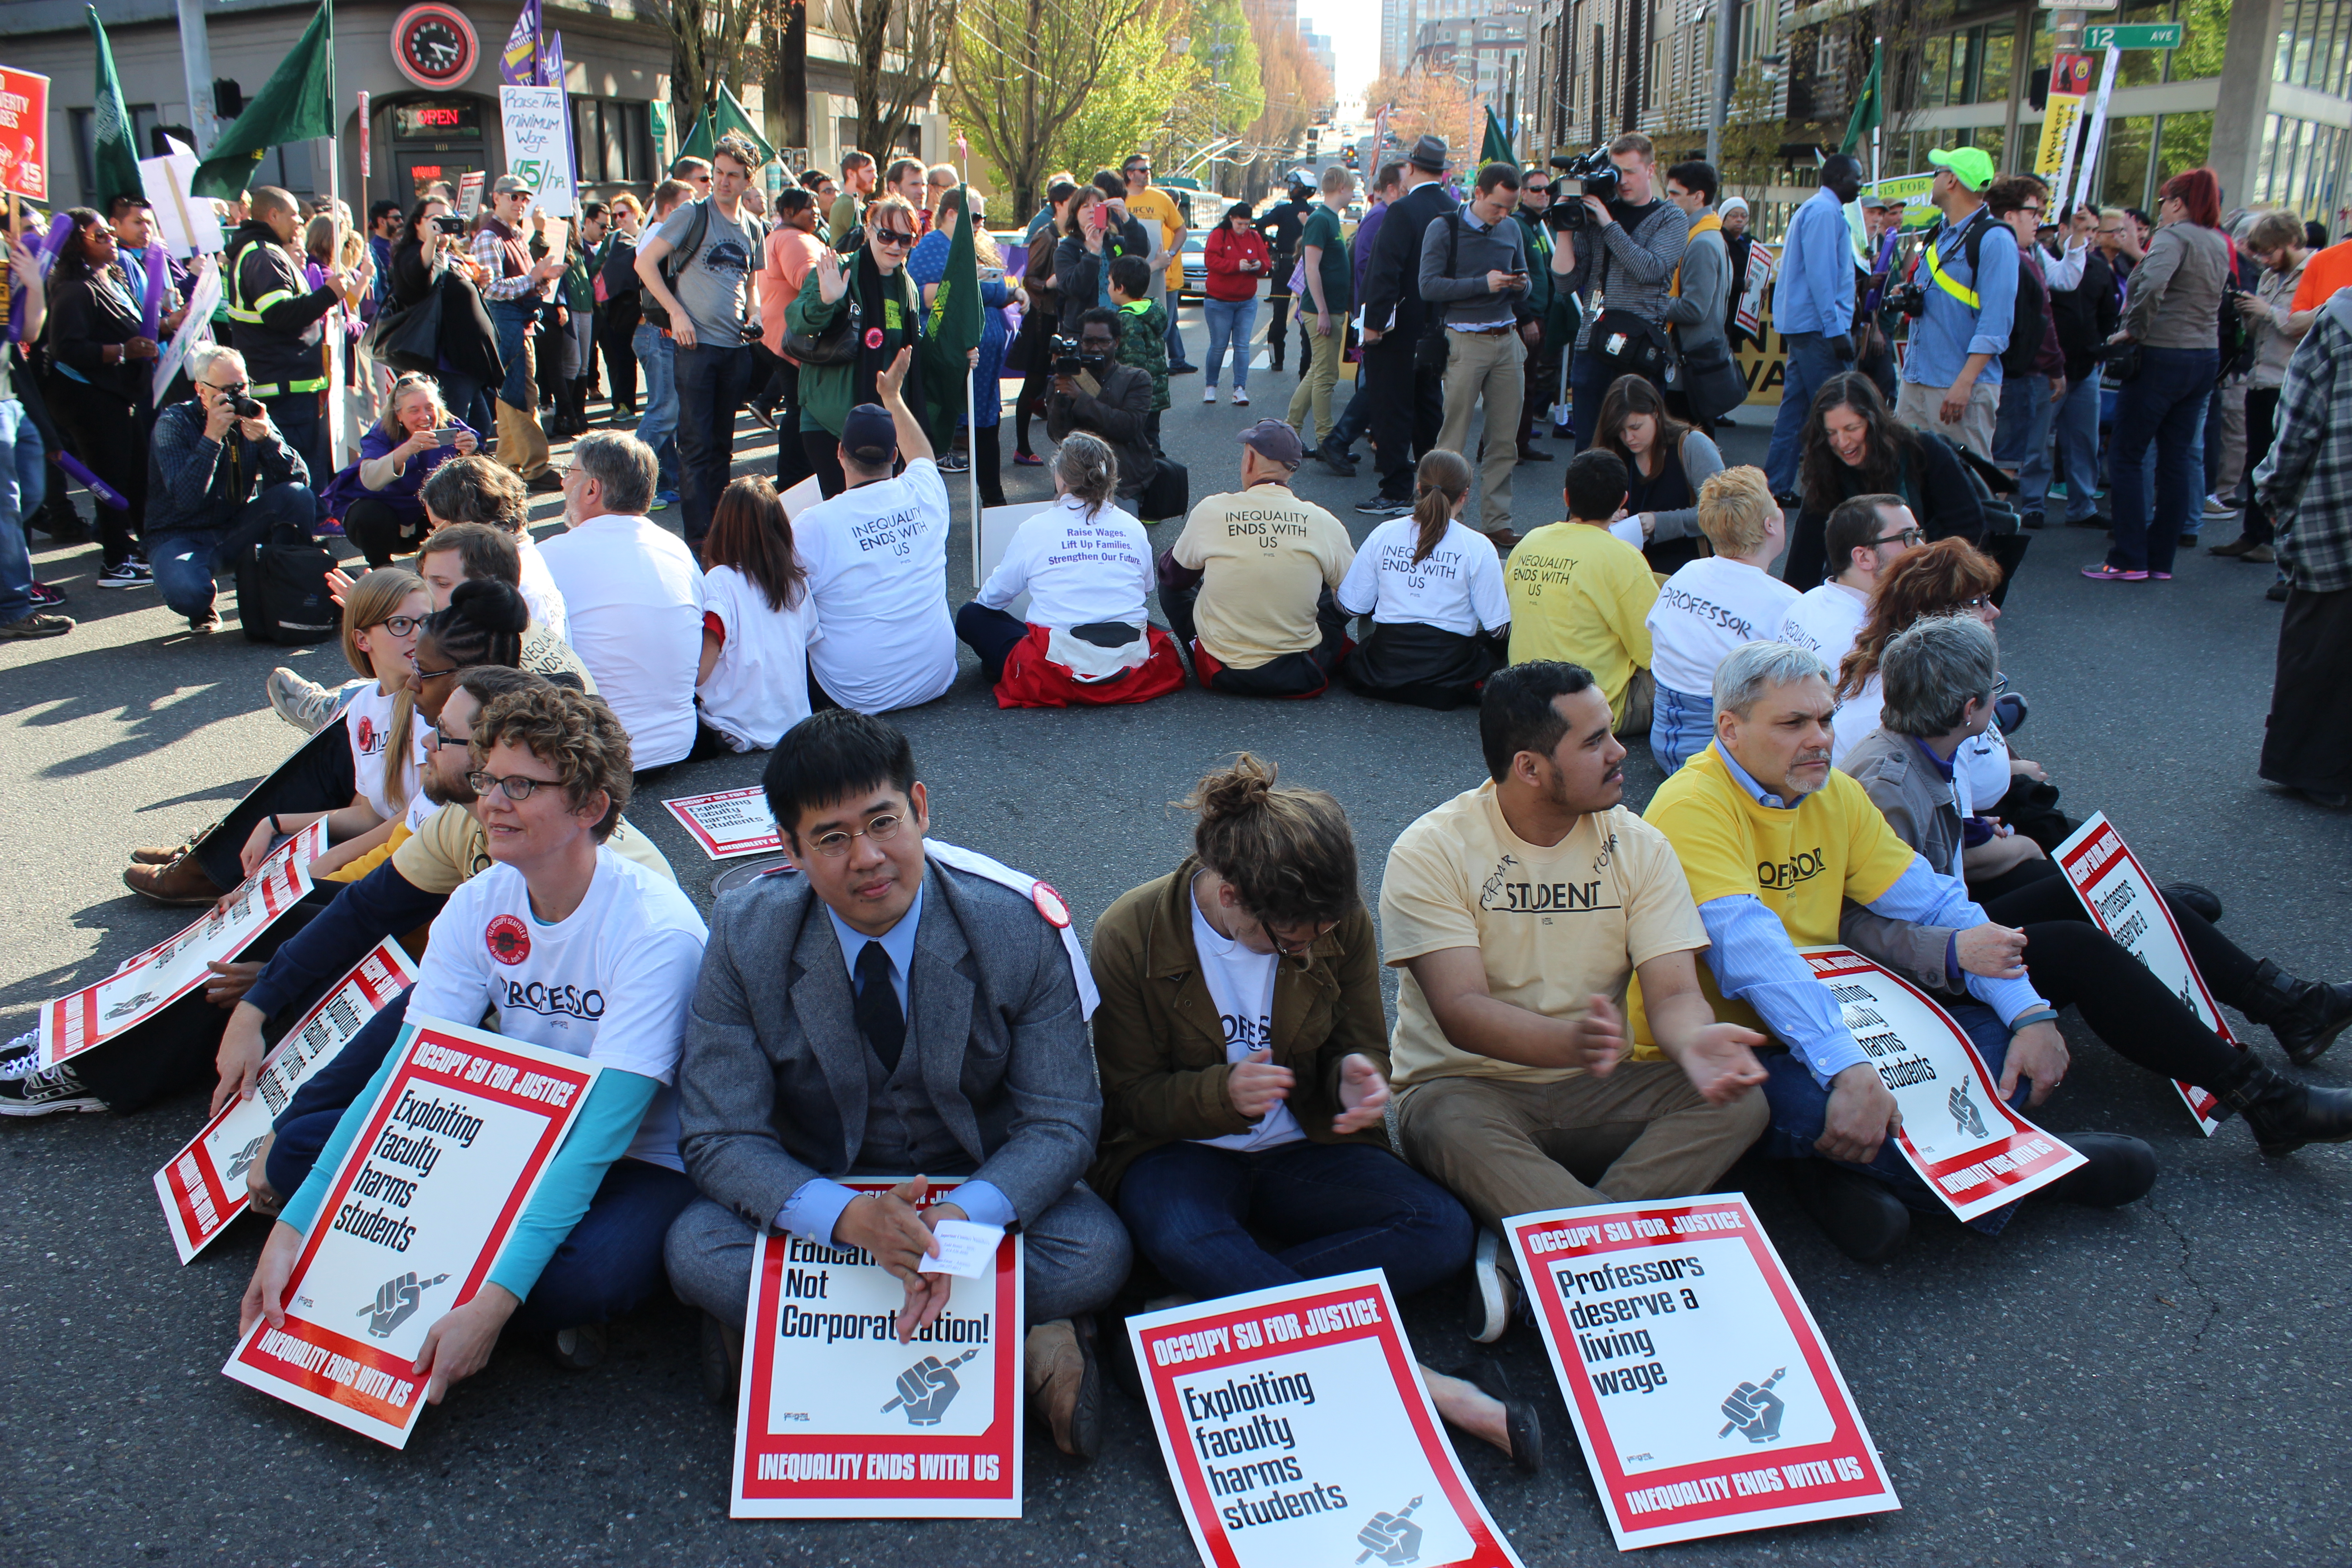 Protesters form a circle at the intersection of 12th and Madison. Photo by Casey Jaywork